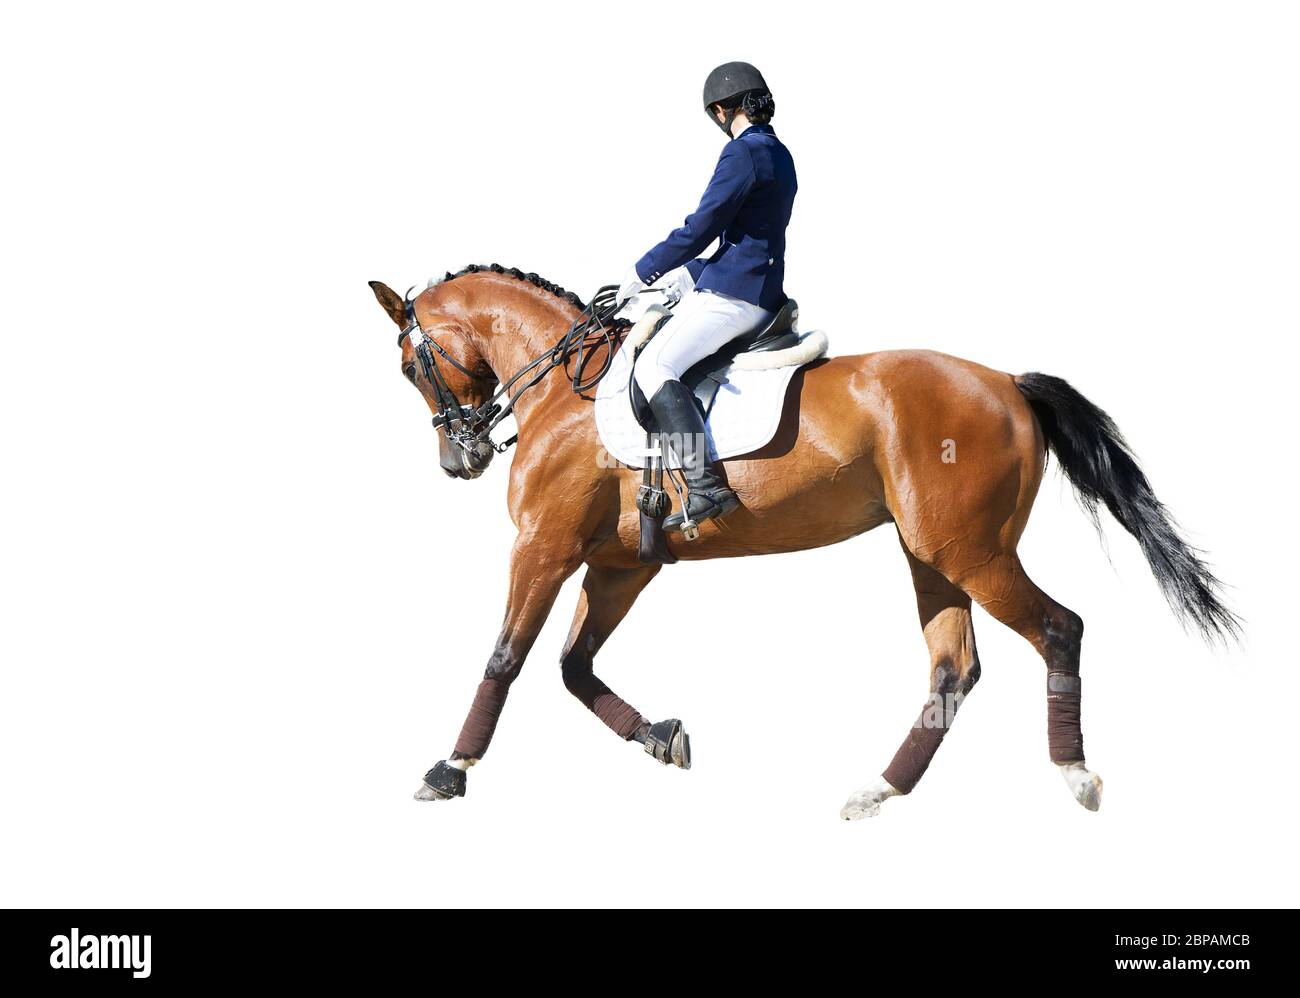 Equestrian sport - dressage rider portrait isolated on white Stock Photo